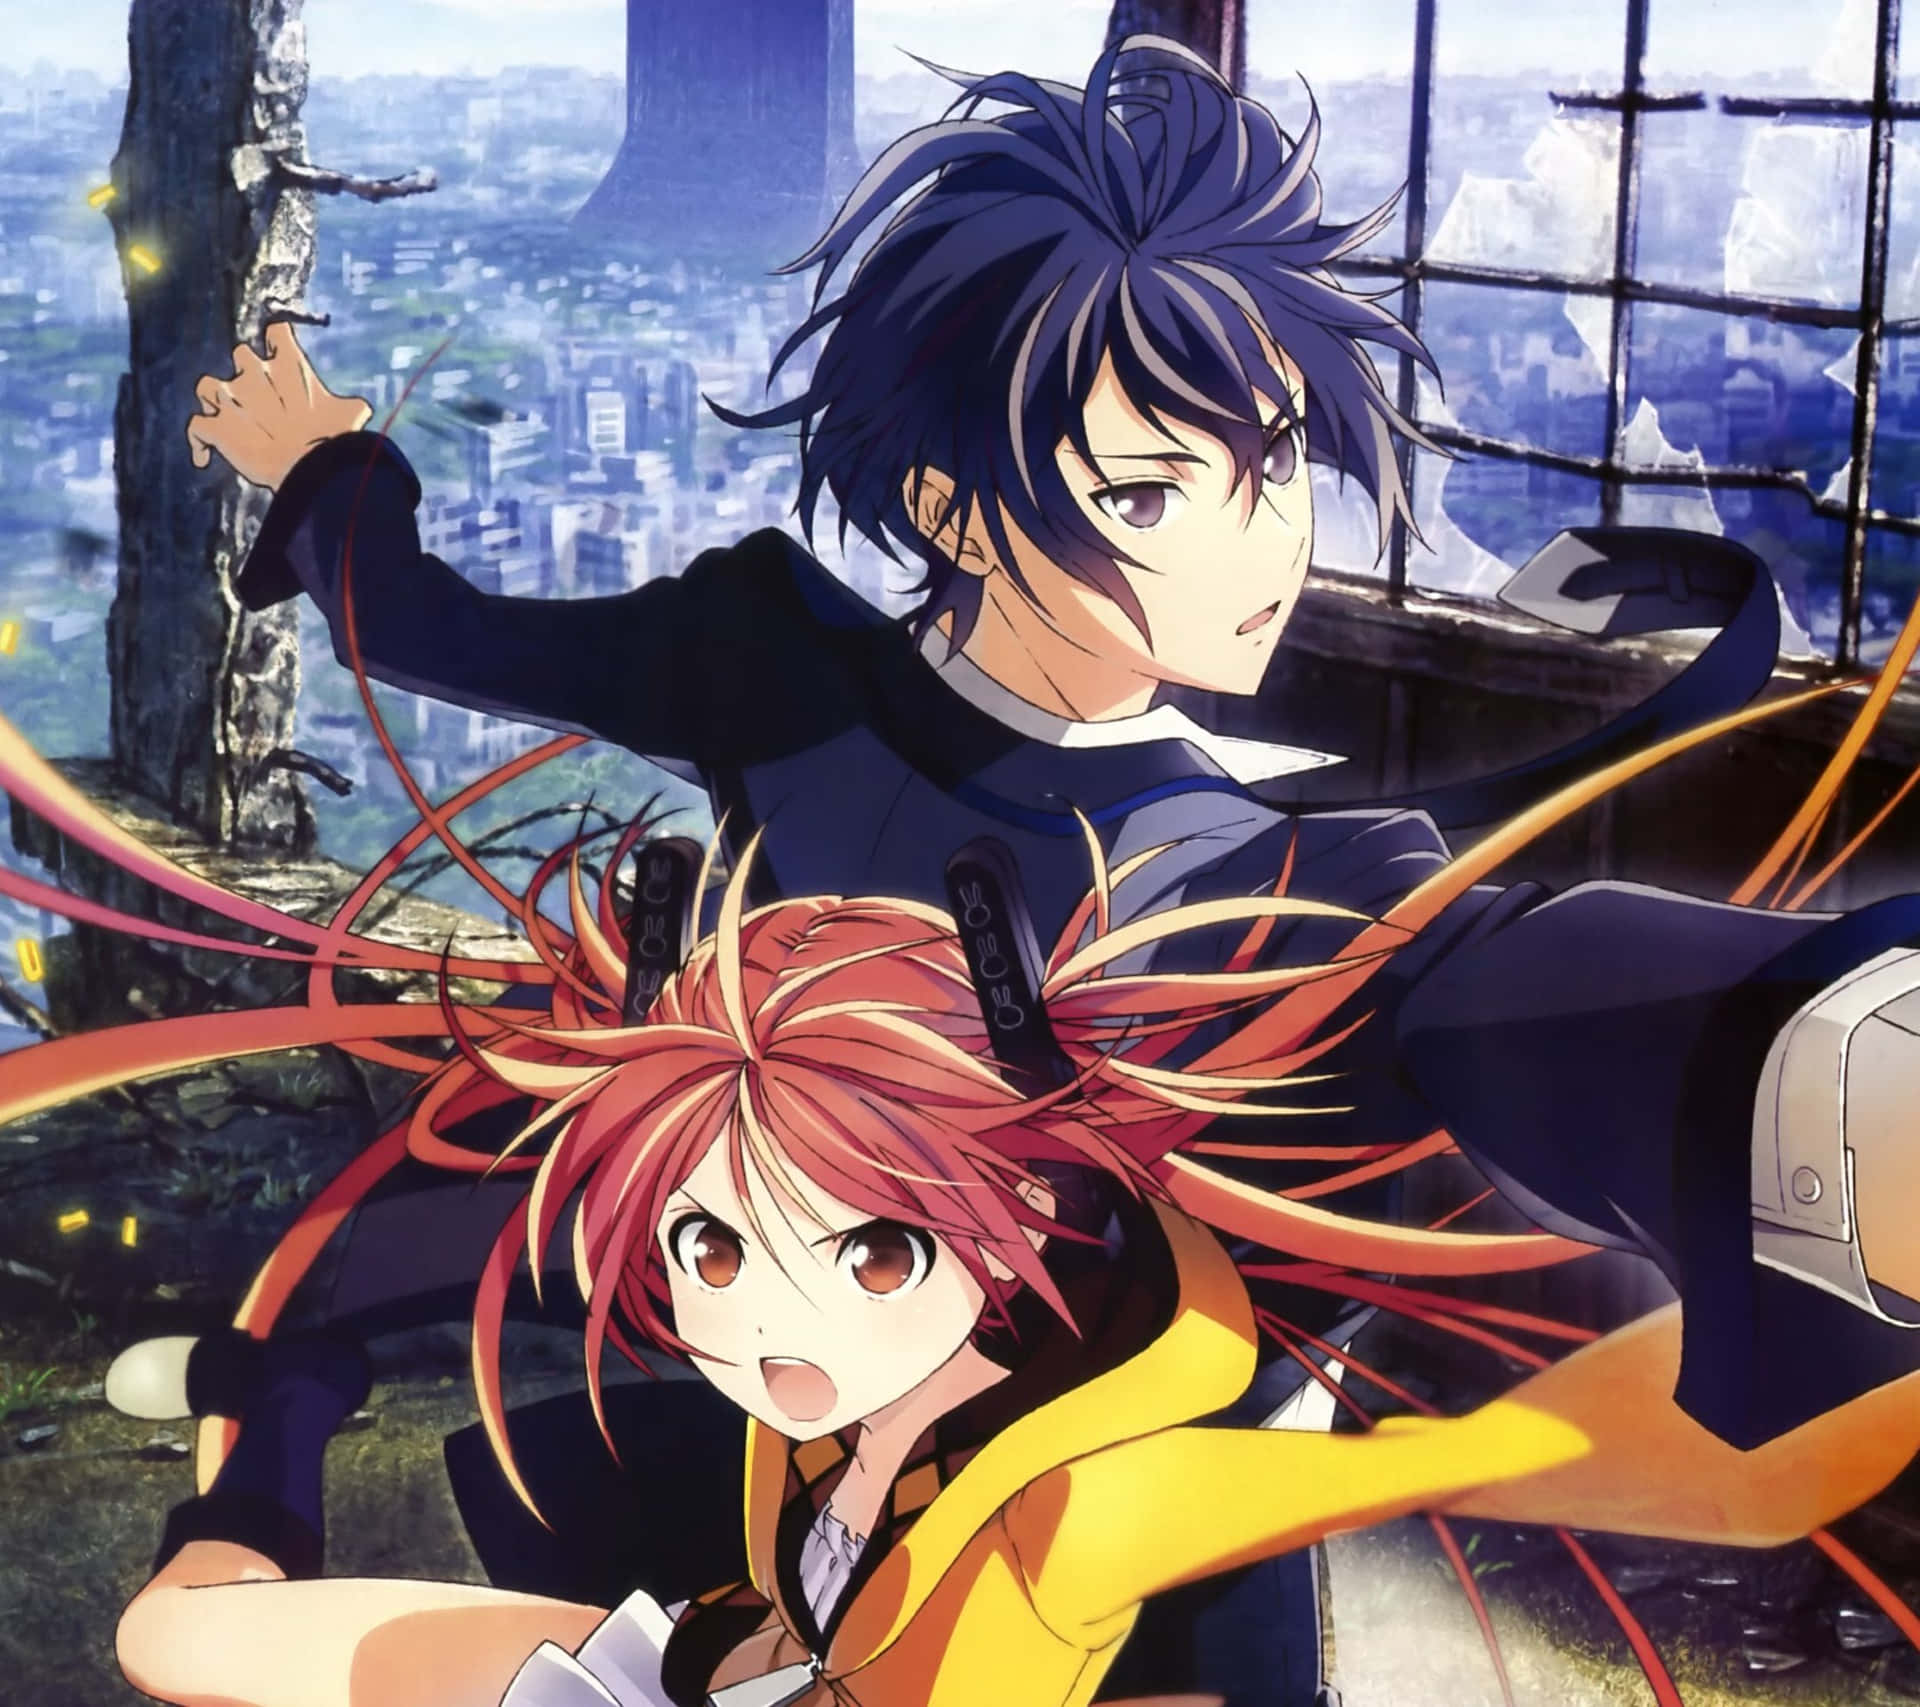 "Face the fierce future together with the characters in Black Bullet!"